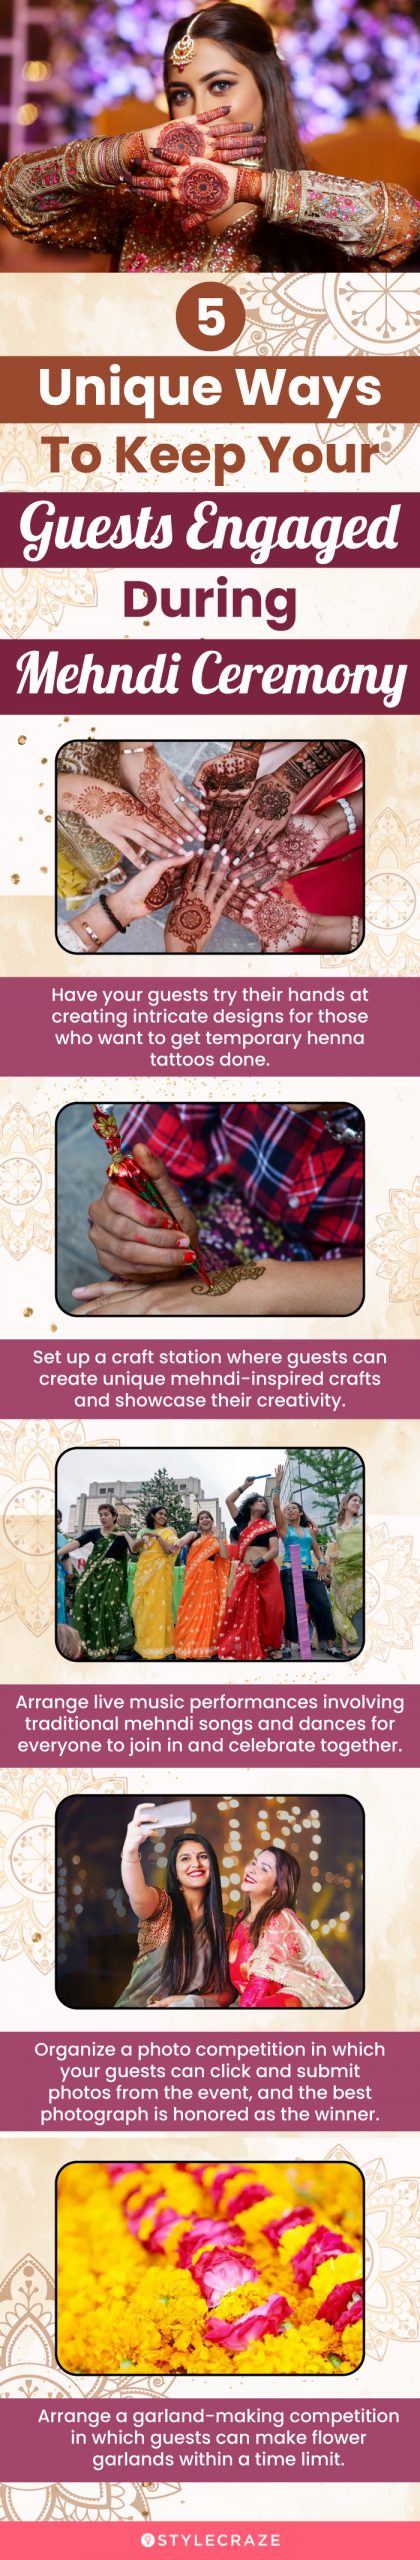 5 unique ways to keep your guest engaged during mehndi ceremony (infographic)